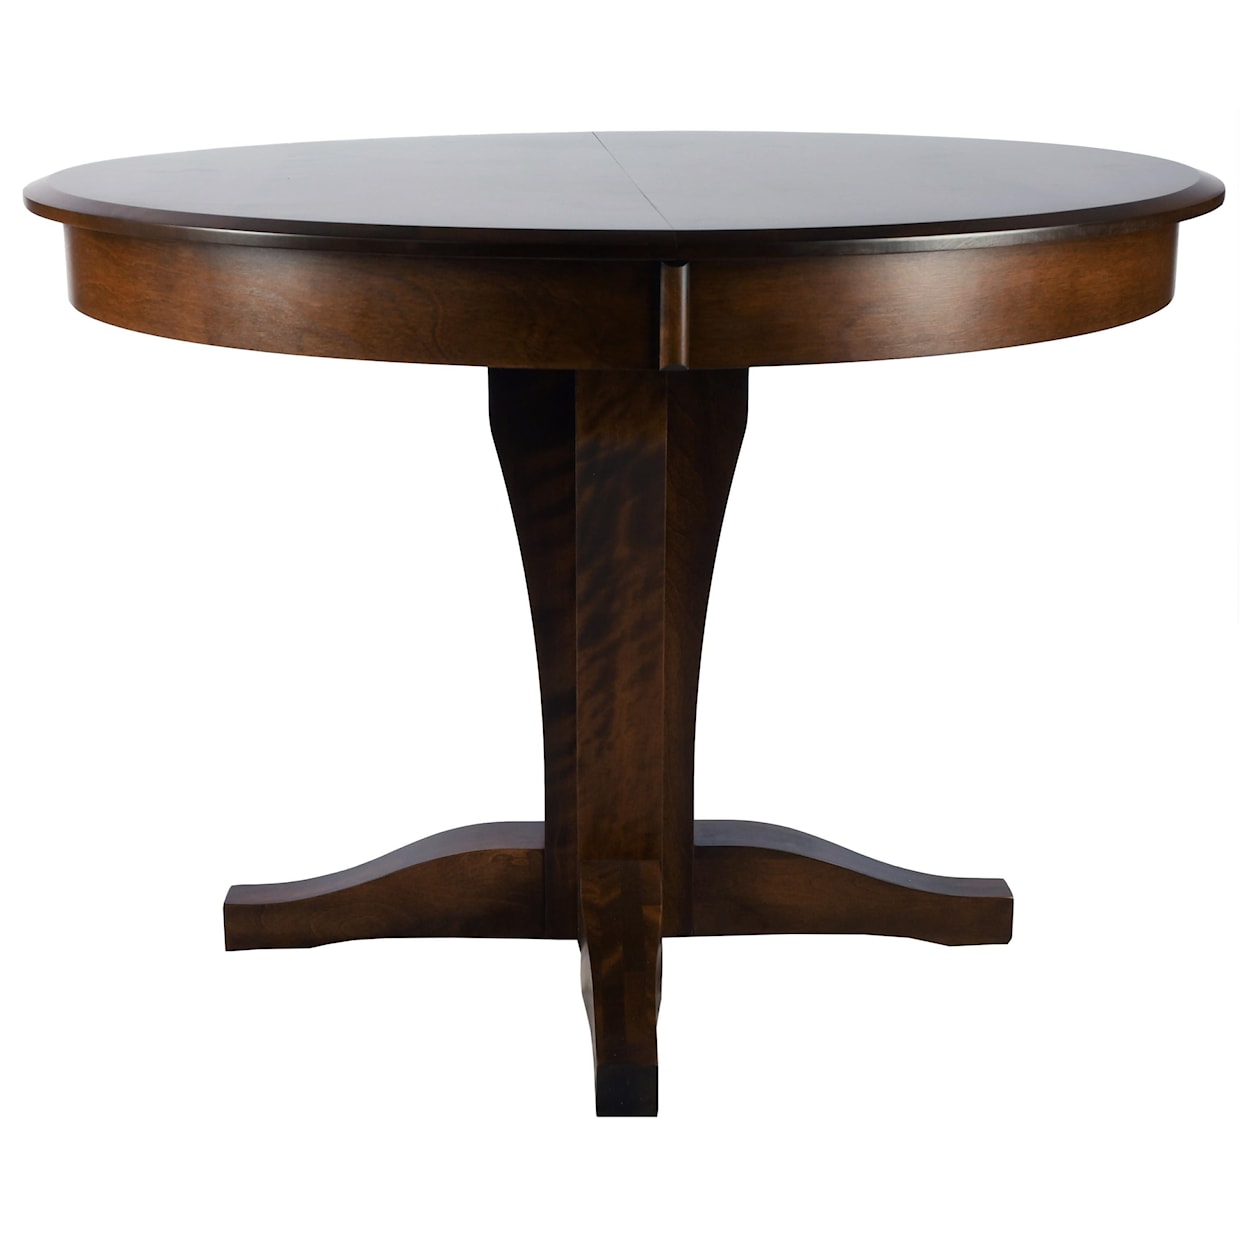 Canadel Canadel Core Dining Table